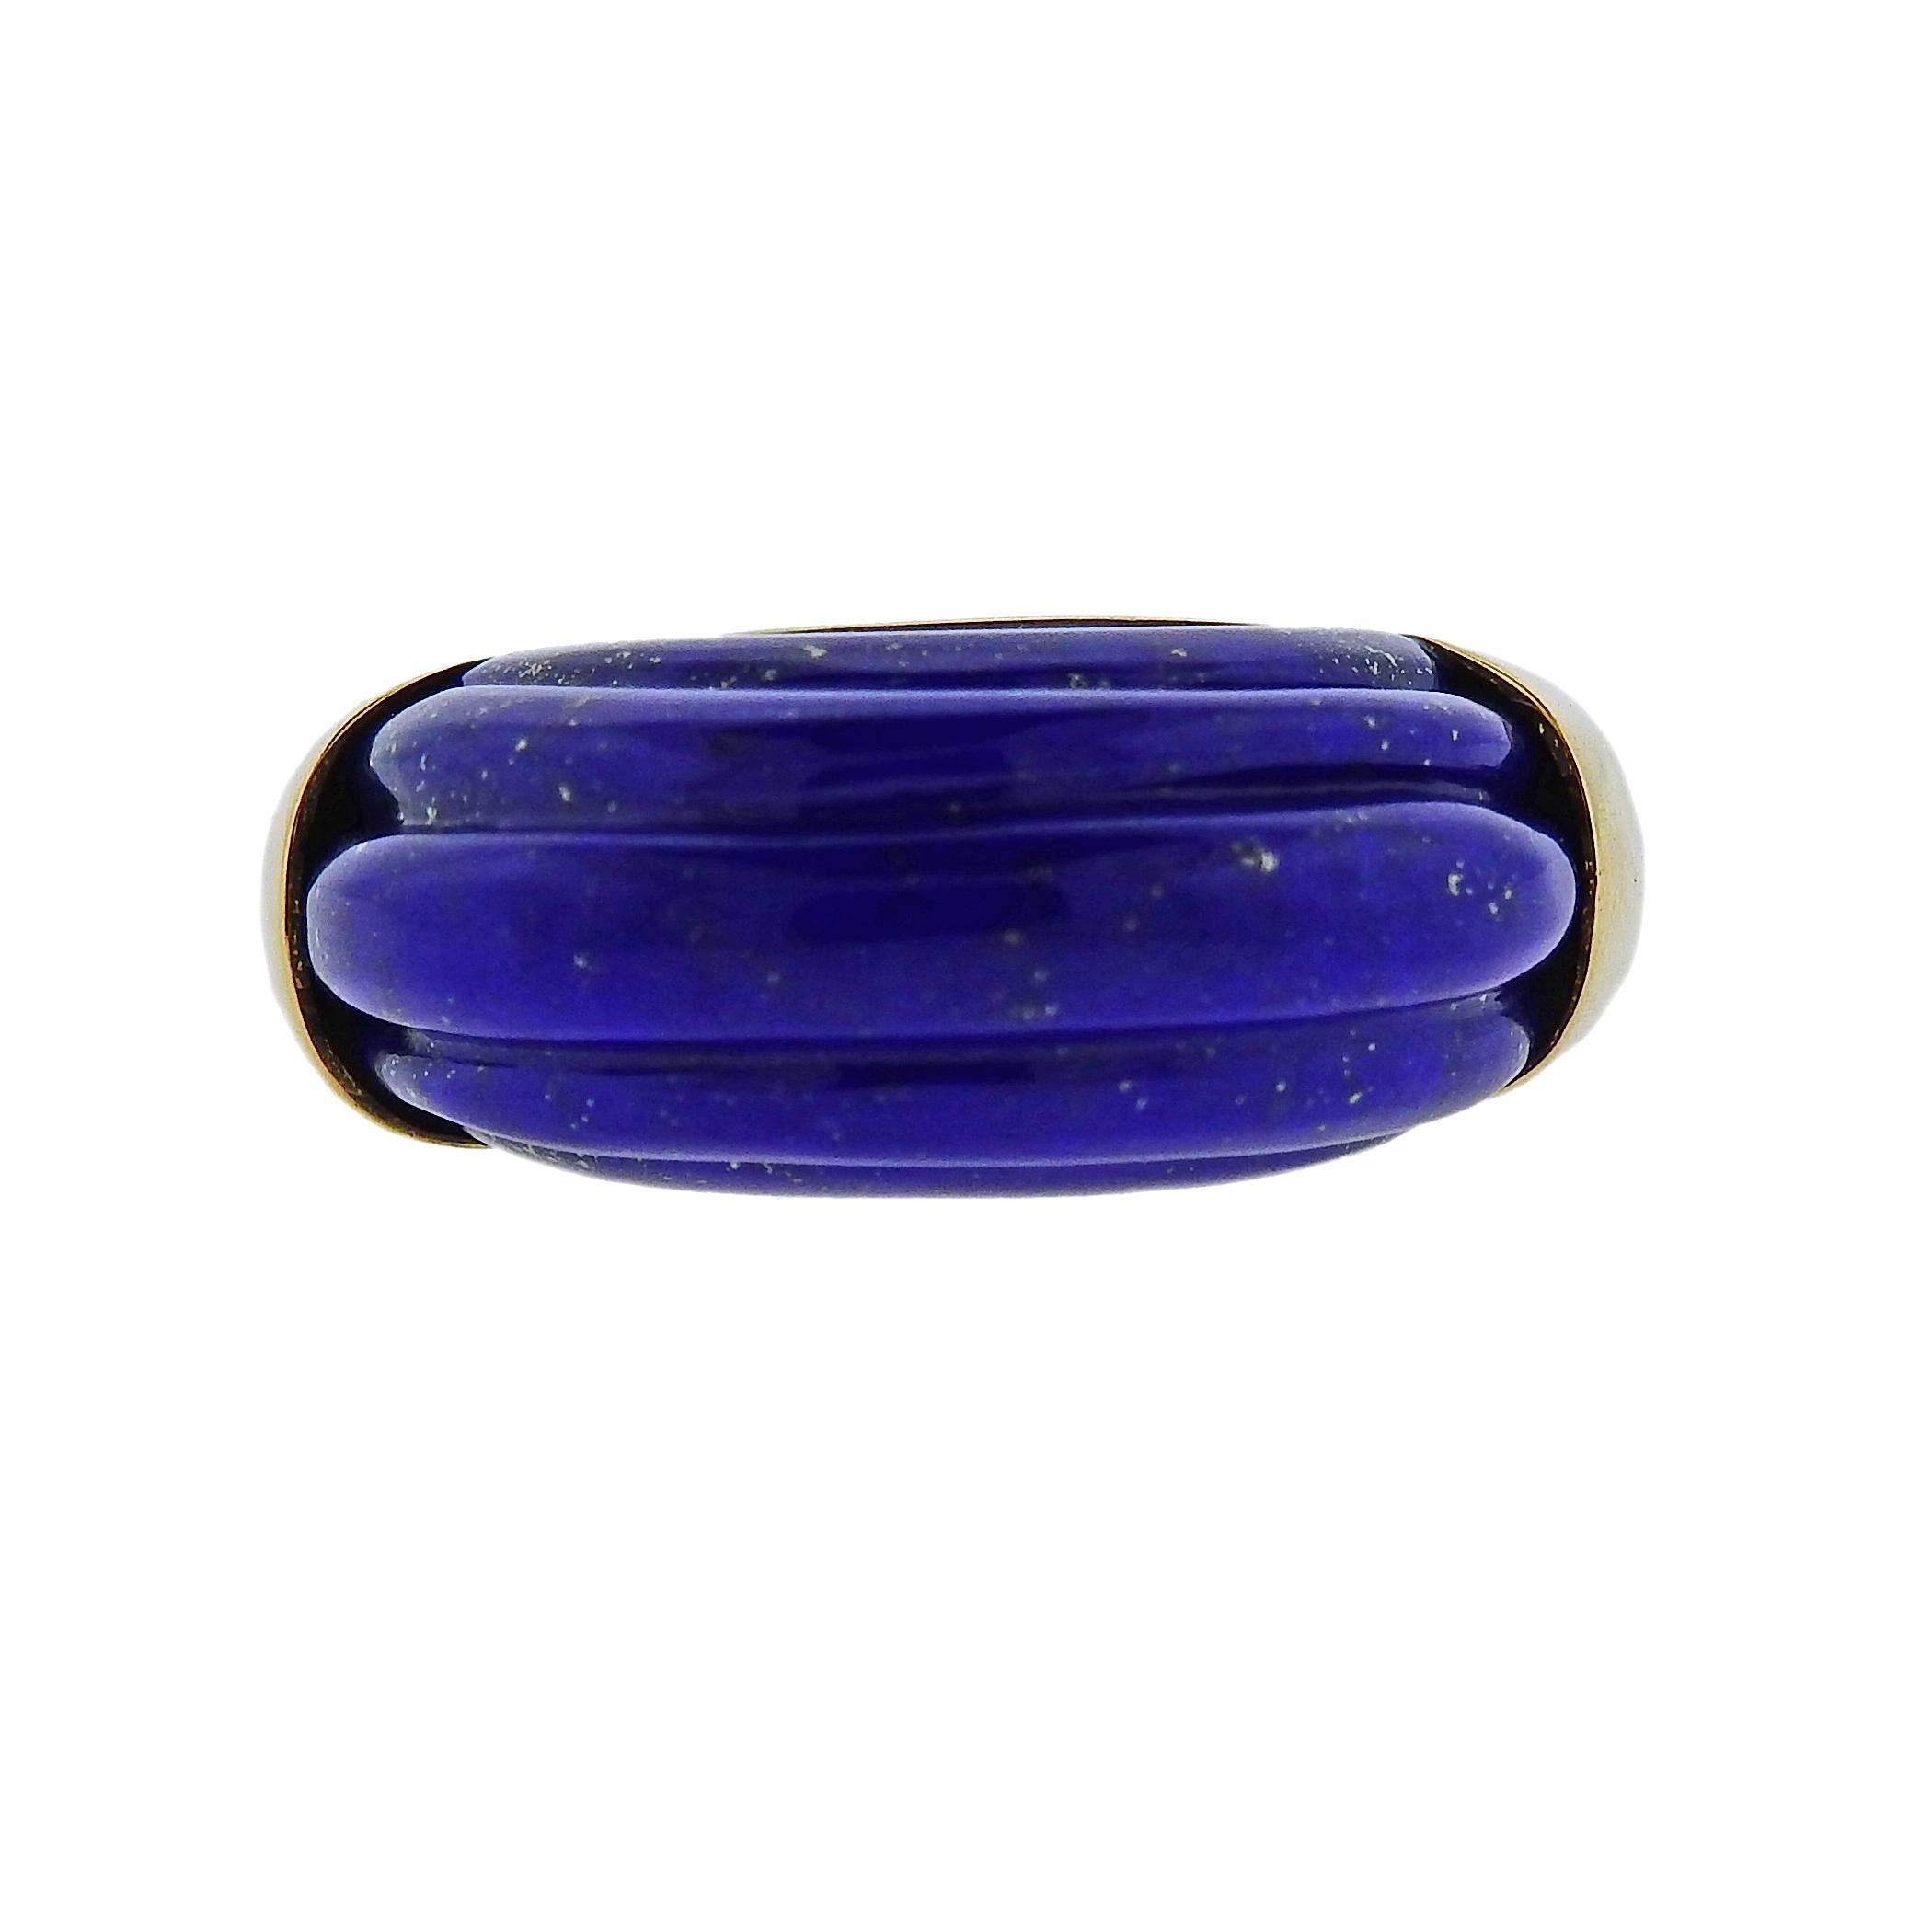 New 18k yellow gold ring, designed by Aletto Brothers, set with carved lapis lazuli. Ring size - 7.25, ring top is 11mm wide. Weighs 13.2 grams. Marked: 750, Aletto Bros.